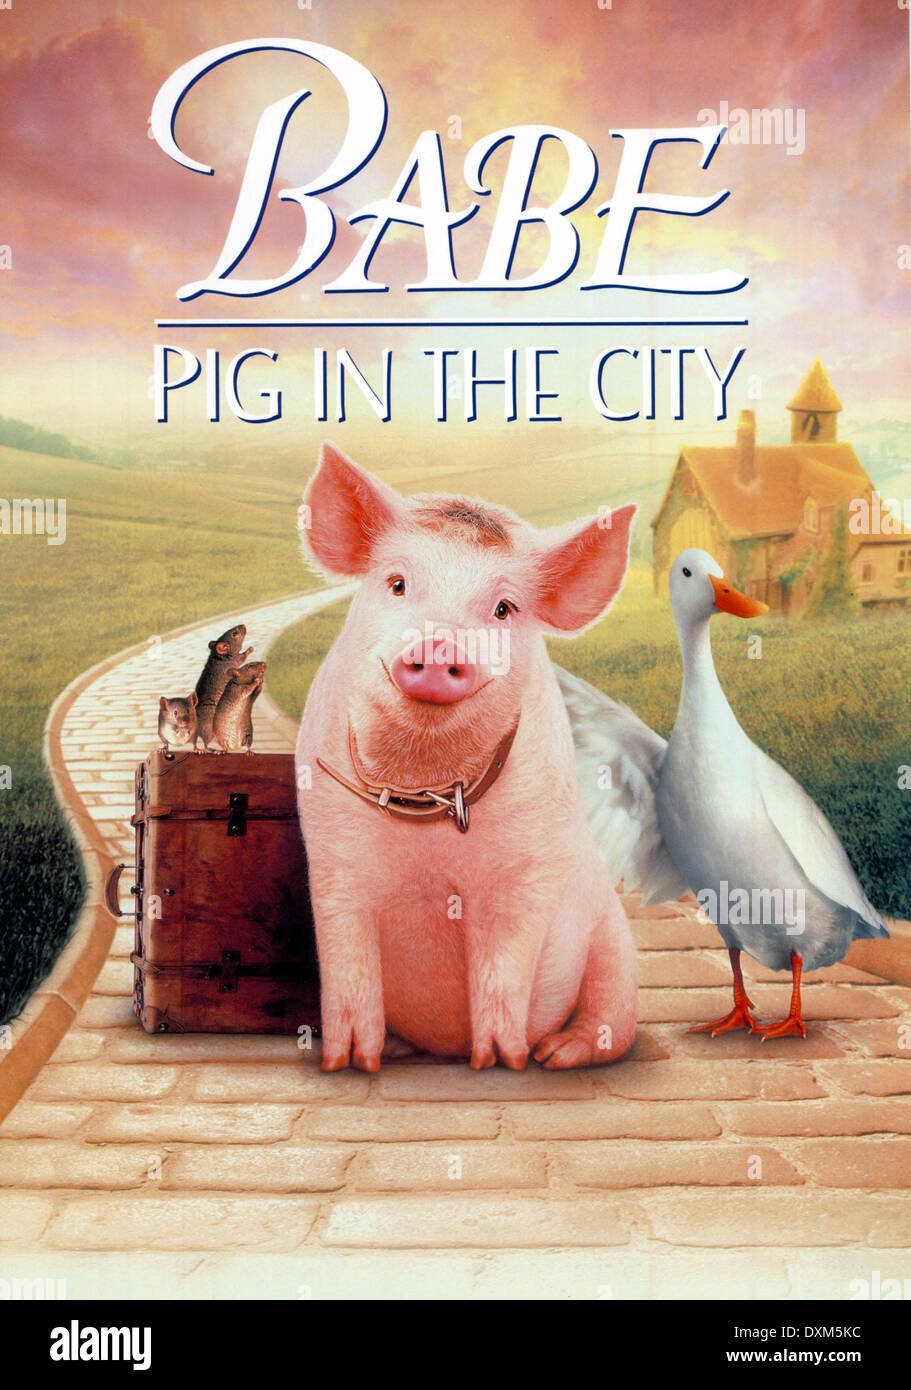 BABE: PIG IN THE CITY Stock Photo